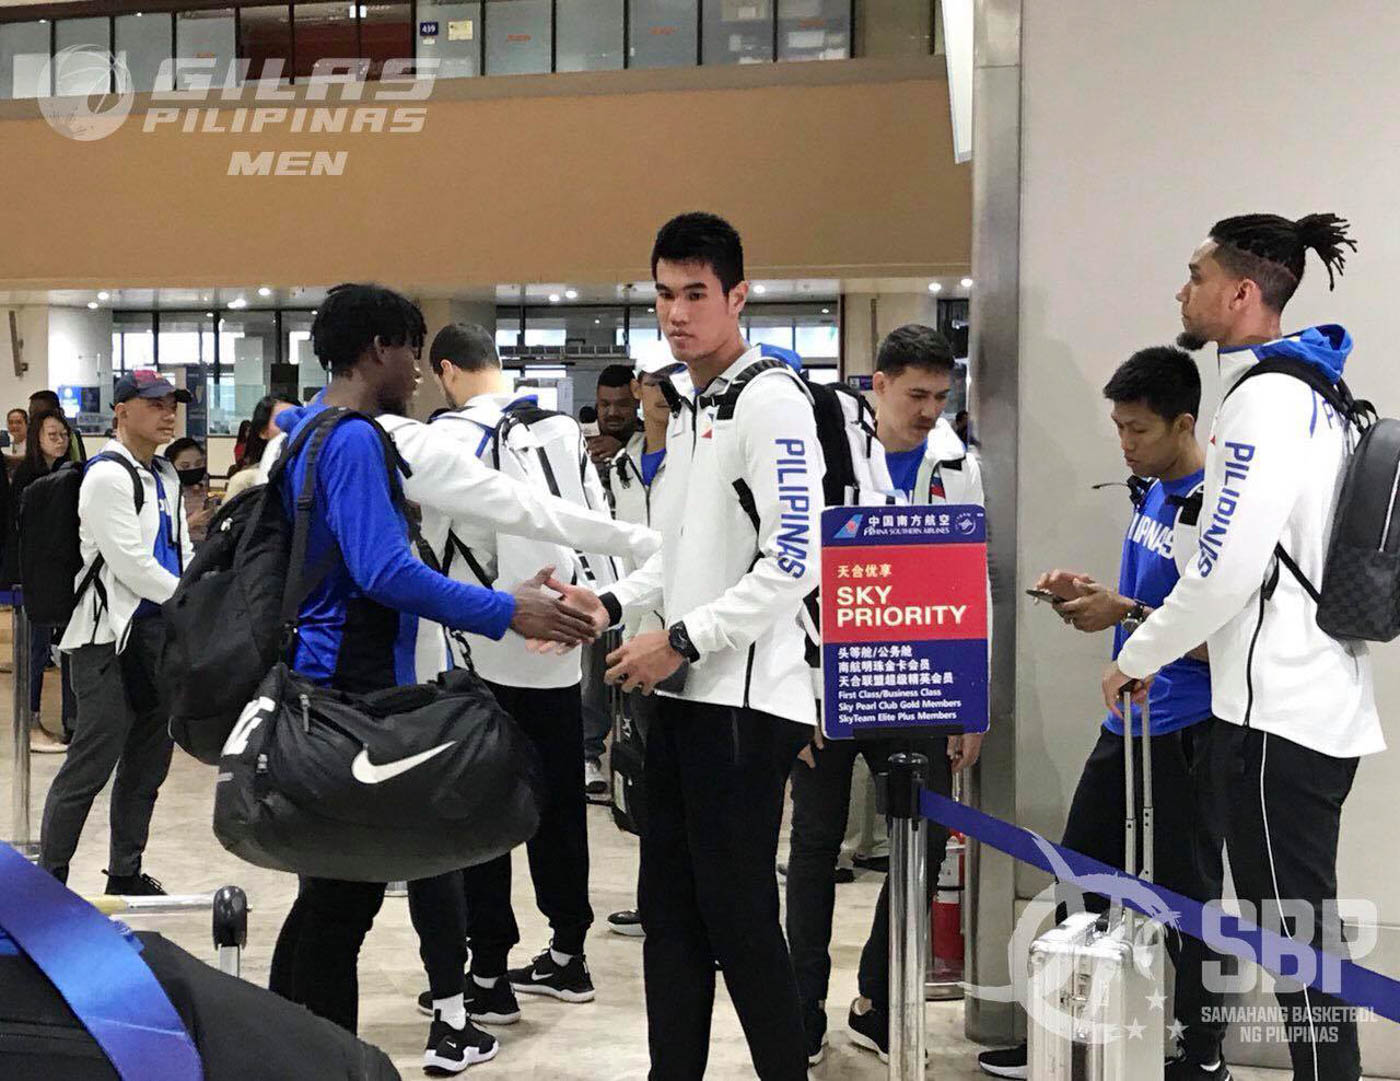 LOOK: Gilas Pilipinas lands in China for FIBA World Cup 2019